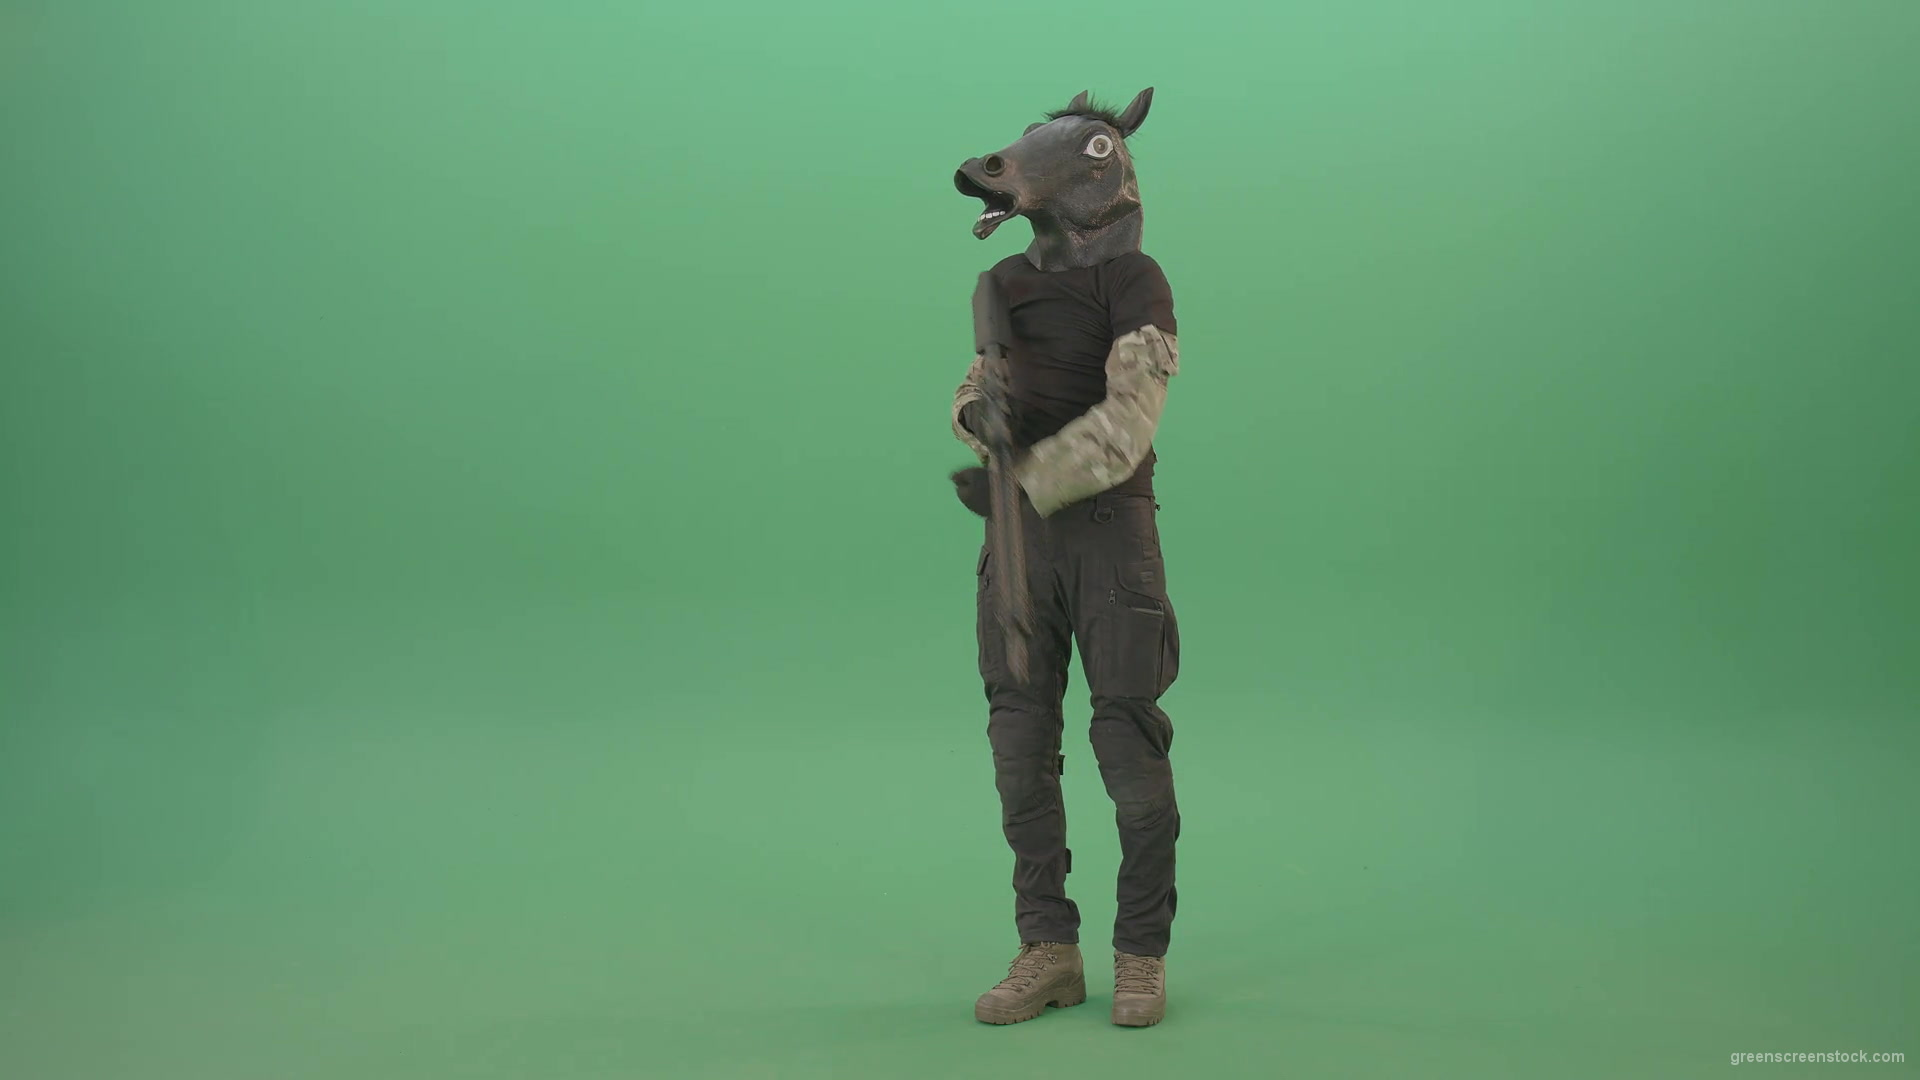 Funny-Army-Horse-Man-shooting-animals-on-Green-Screen-from-Machine-Gun-4K-Video-Footage-1920_002 Green Screen Stock